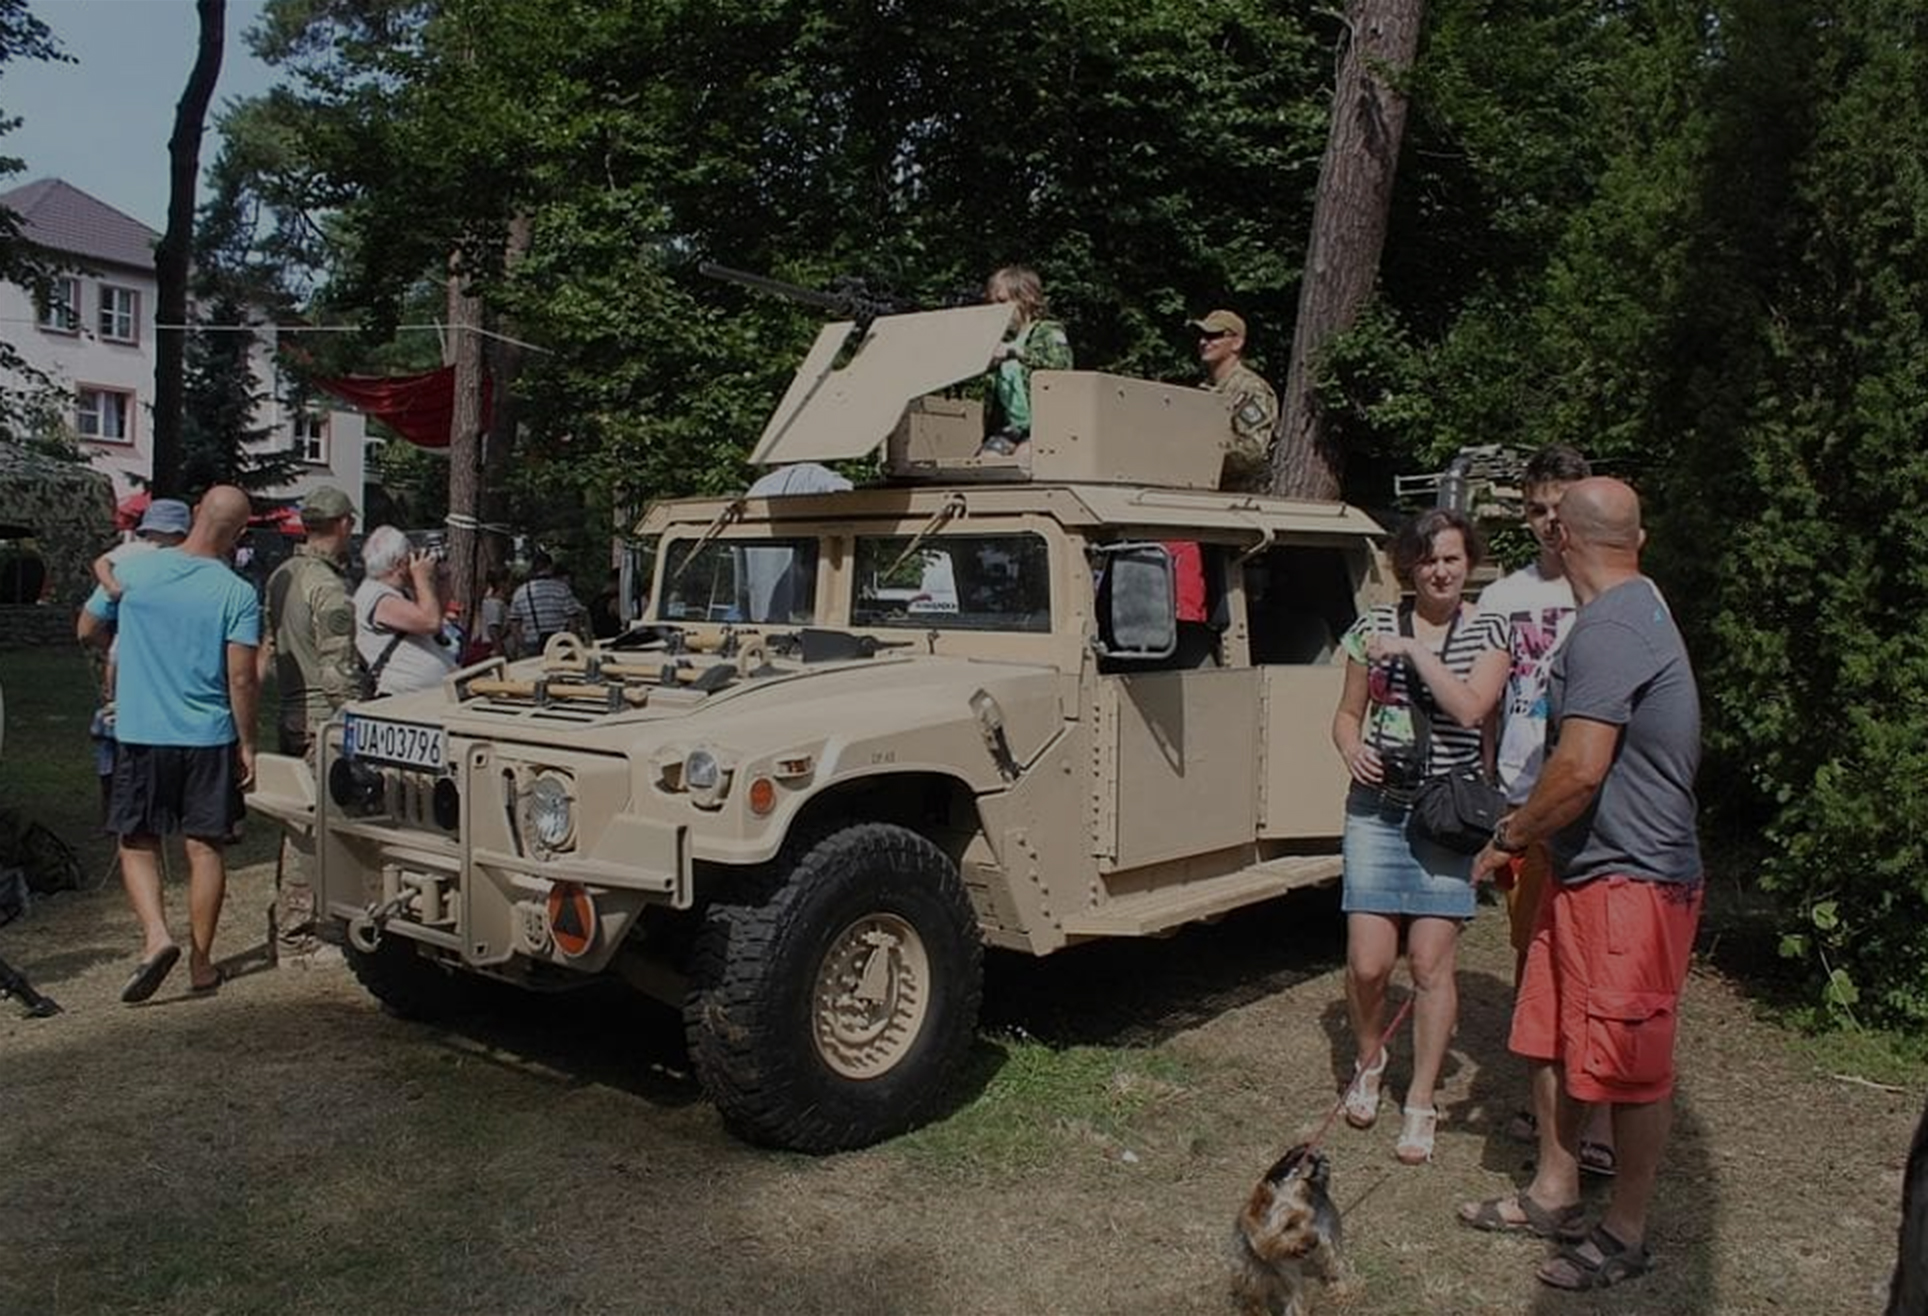 27-29 August 2021 – XII Special Forces Picnic in Dziwnów